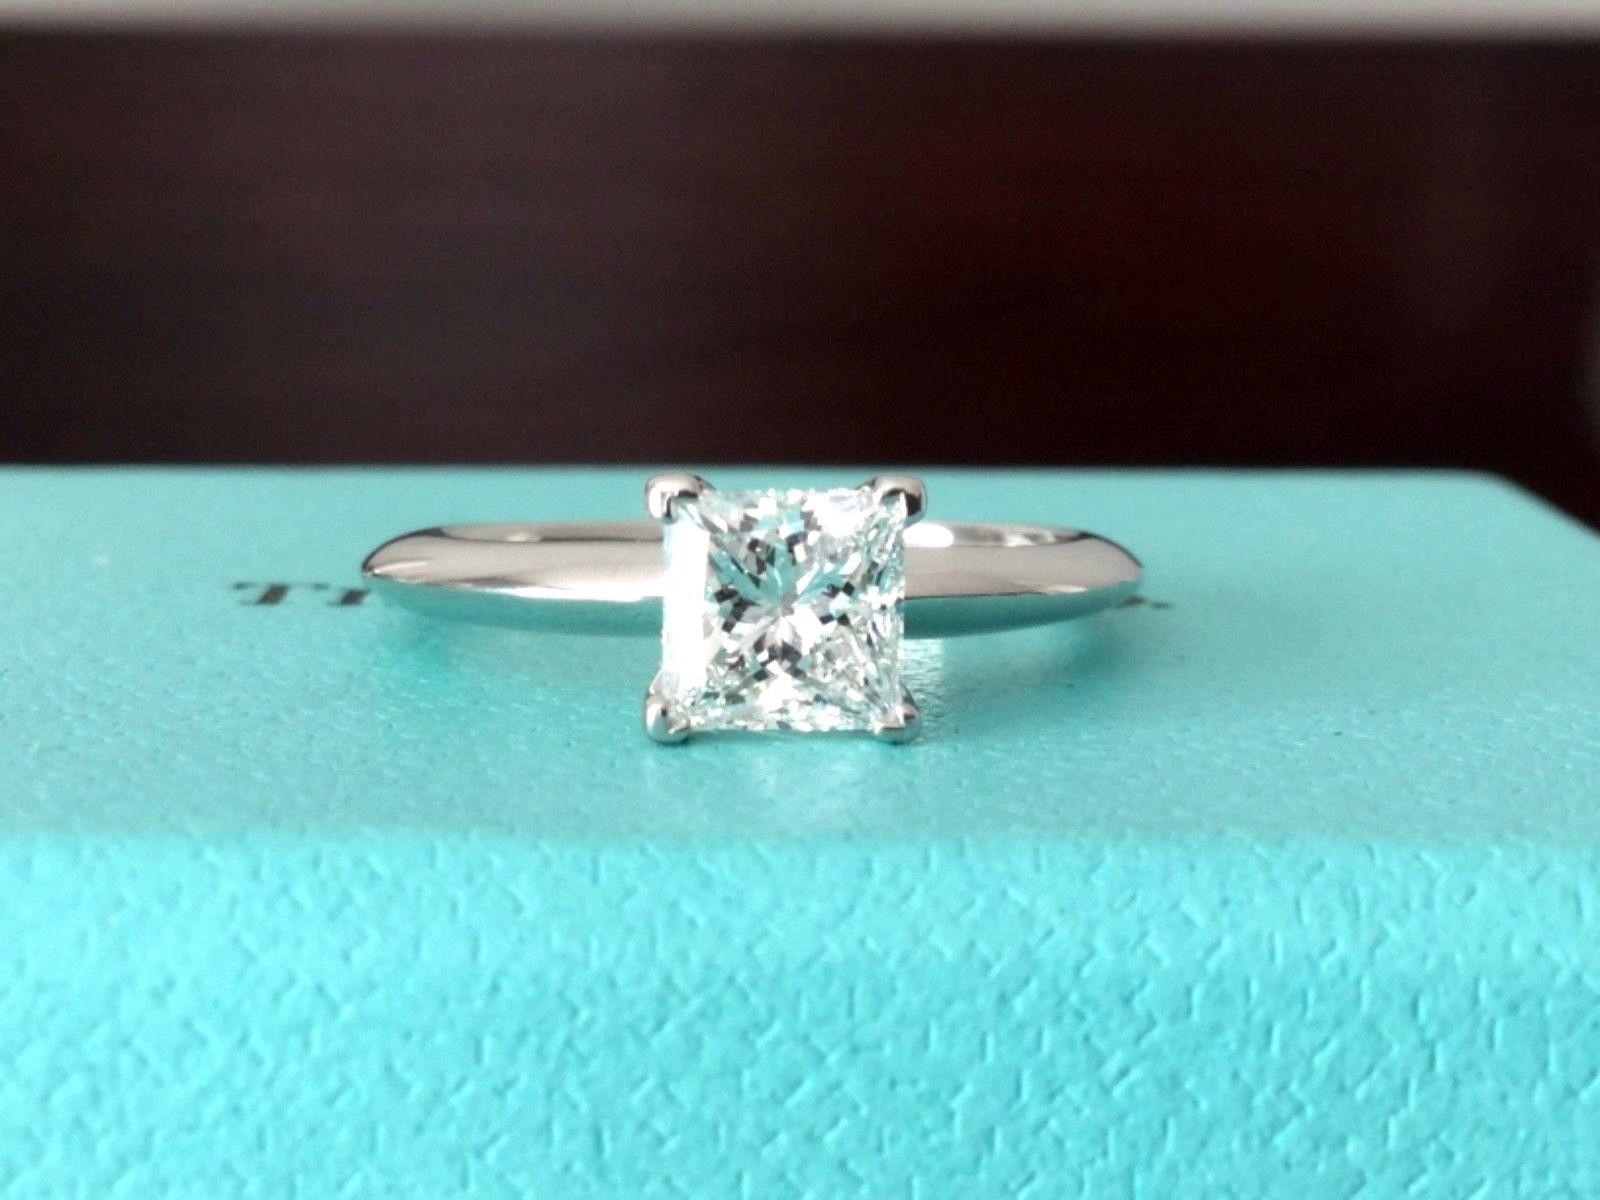 For your consideration is a Tiffany & Co Princess cut, natural diamond solitaire that is .79 carats, F in Color and VS1 in Clarity and EXCELLENT cut and polish and very good symmetry making it a very rare and desirable diamond.  It is set in the